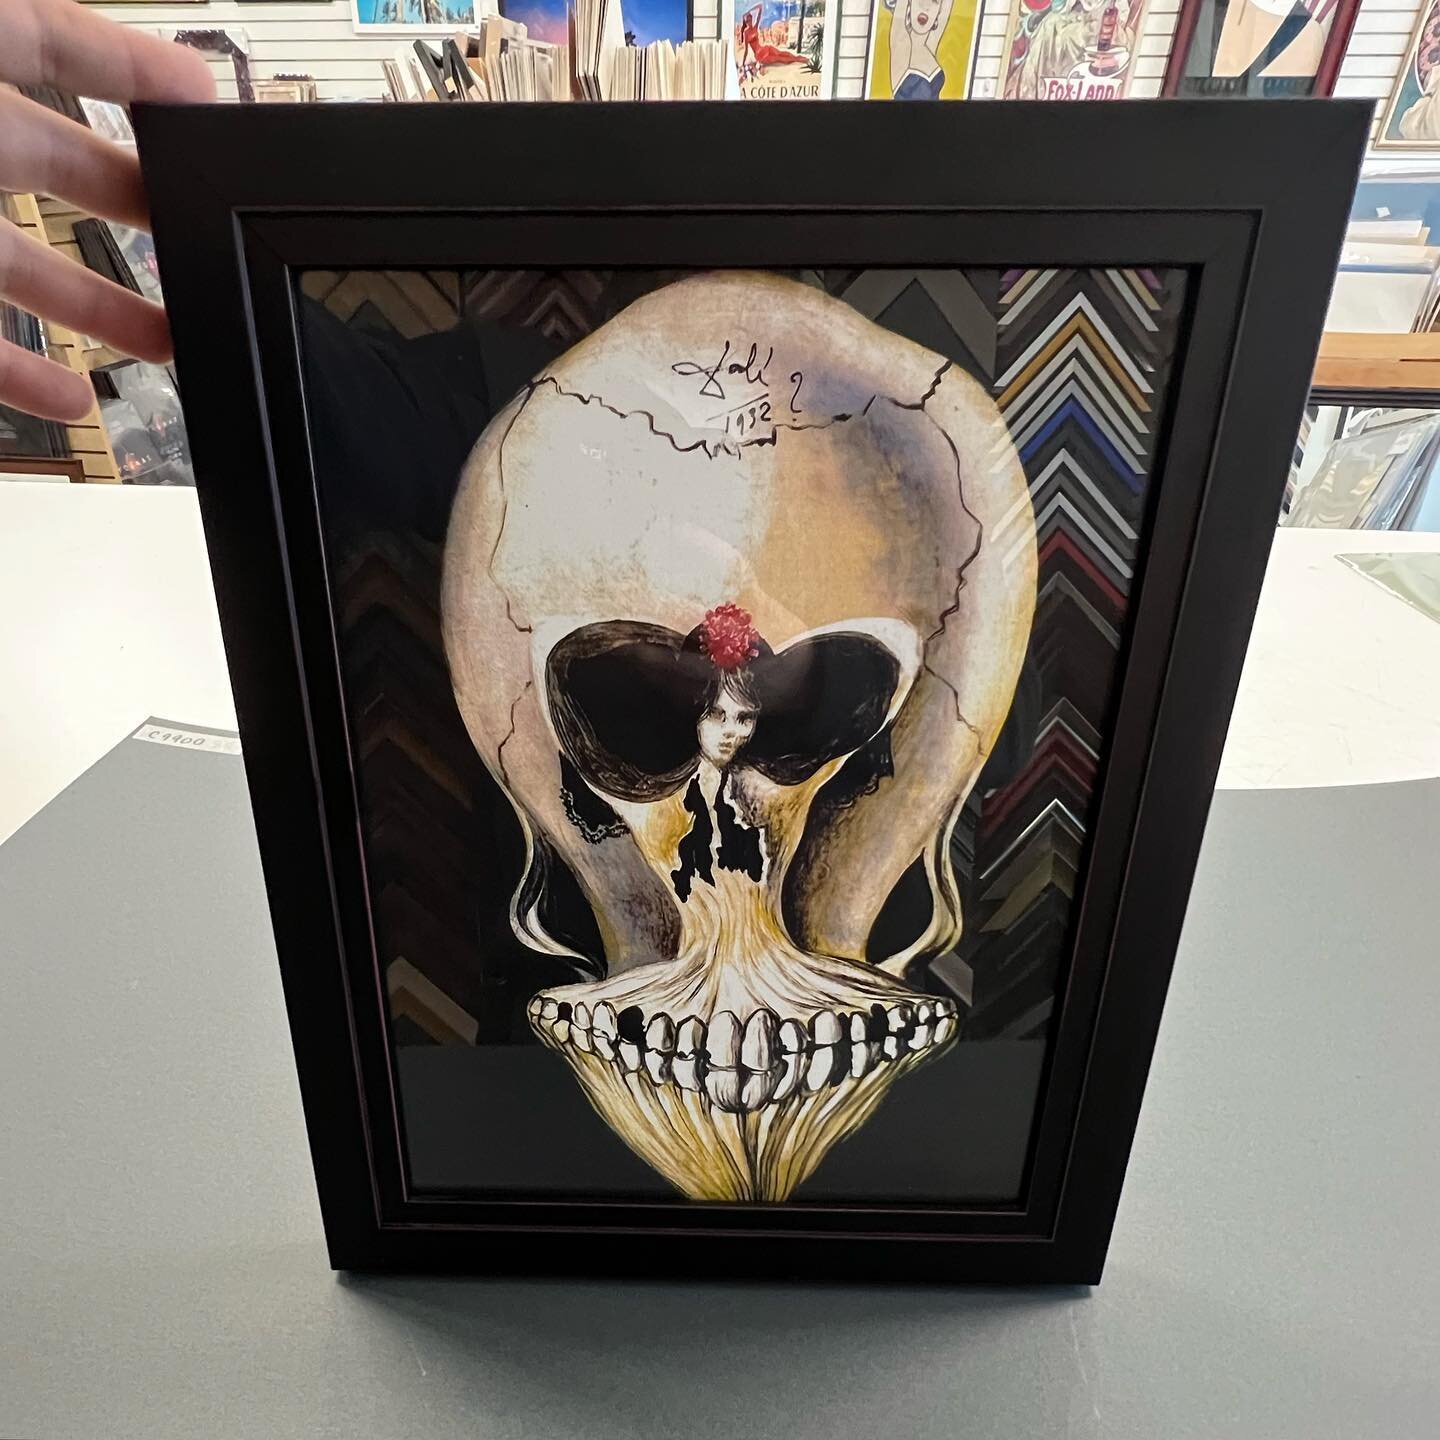 Check out this hidden beauty, now on our wall full of ready to hang art and frames! 💀 
&bull;&bull;
&bull;&bull;&bull;
&bull;&bull;
#aztecgraphics #pacificbeach #pacificbeachbusiness #posters #prints #art #sandiego #framing #customframing #sandiegoa